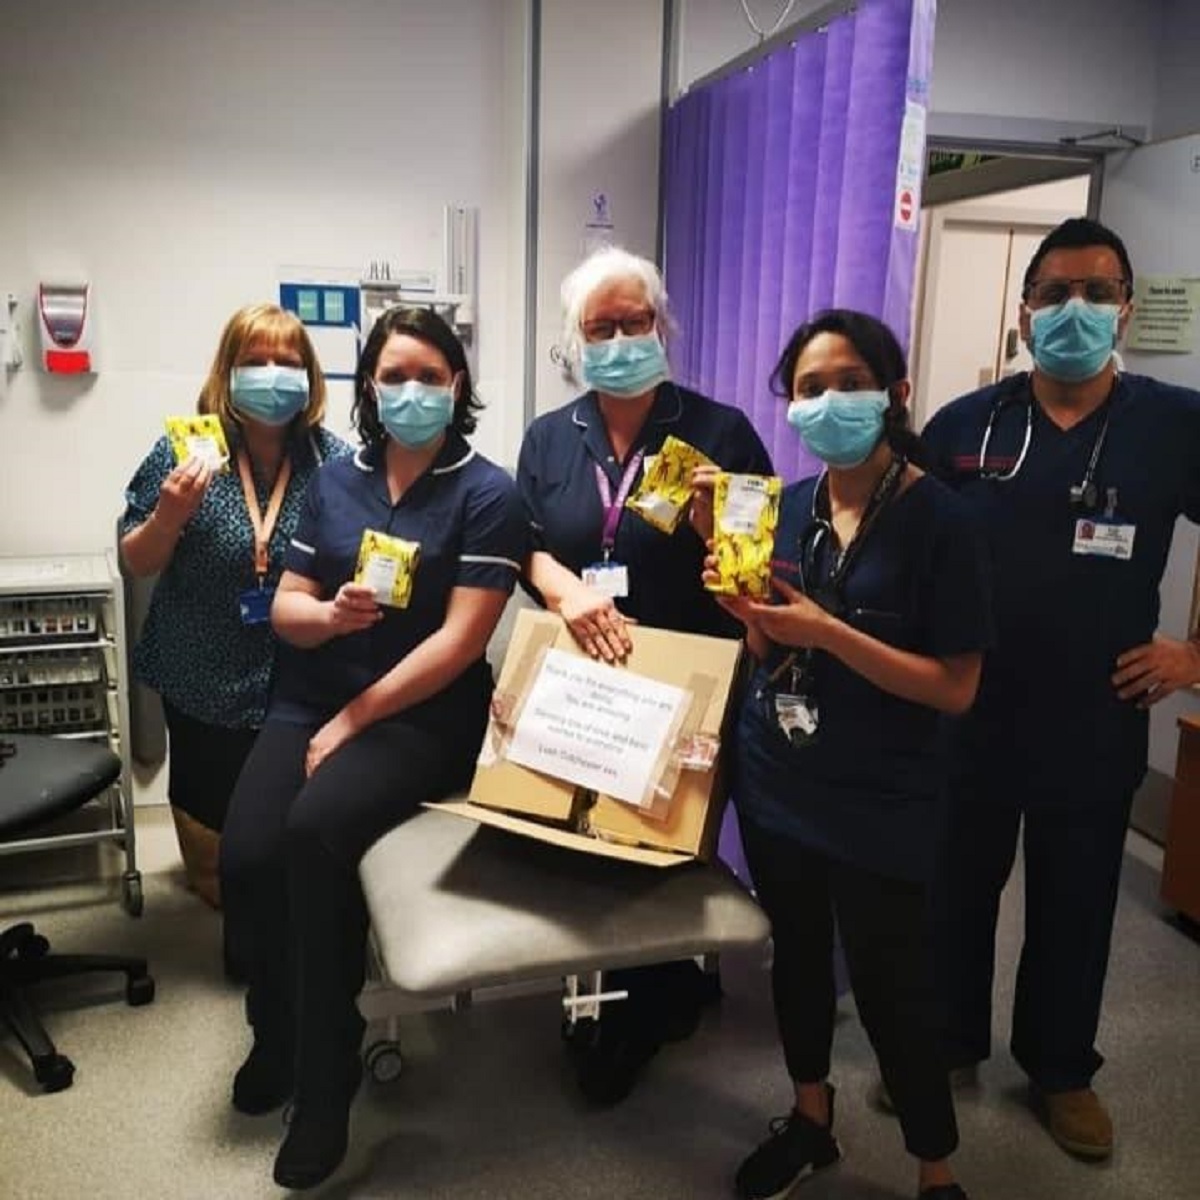 Our heroes - the Anti-Loo Roll Brigade delivered gifts from the Bodyshop to NHS staff